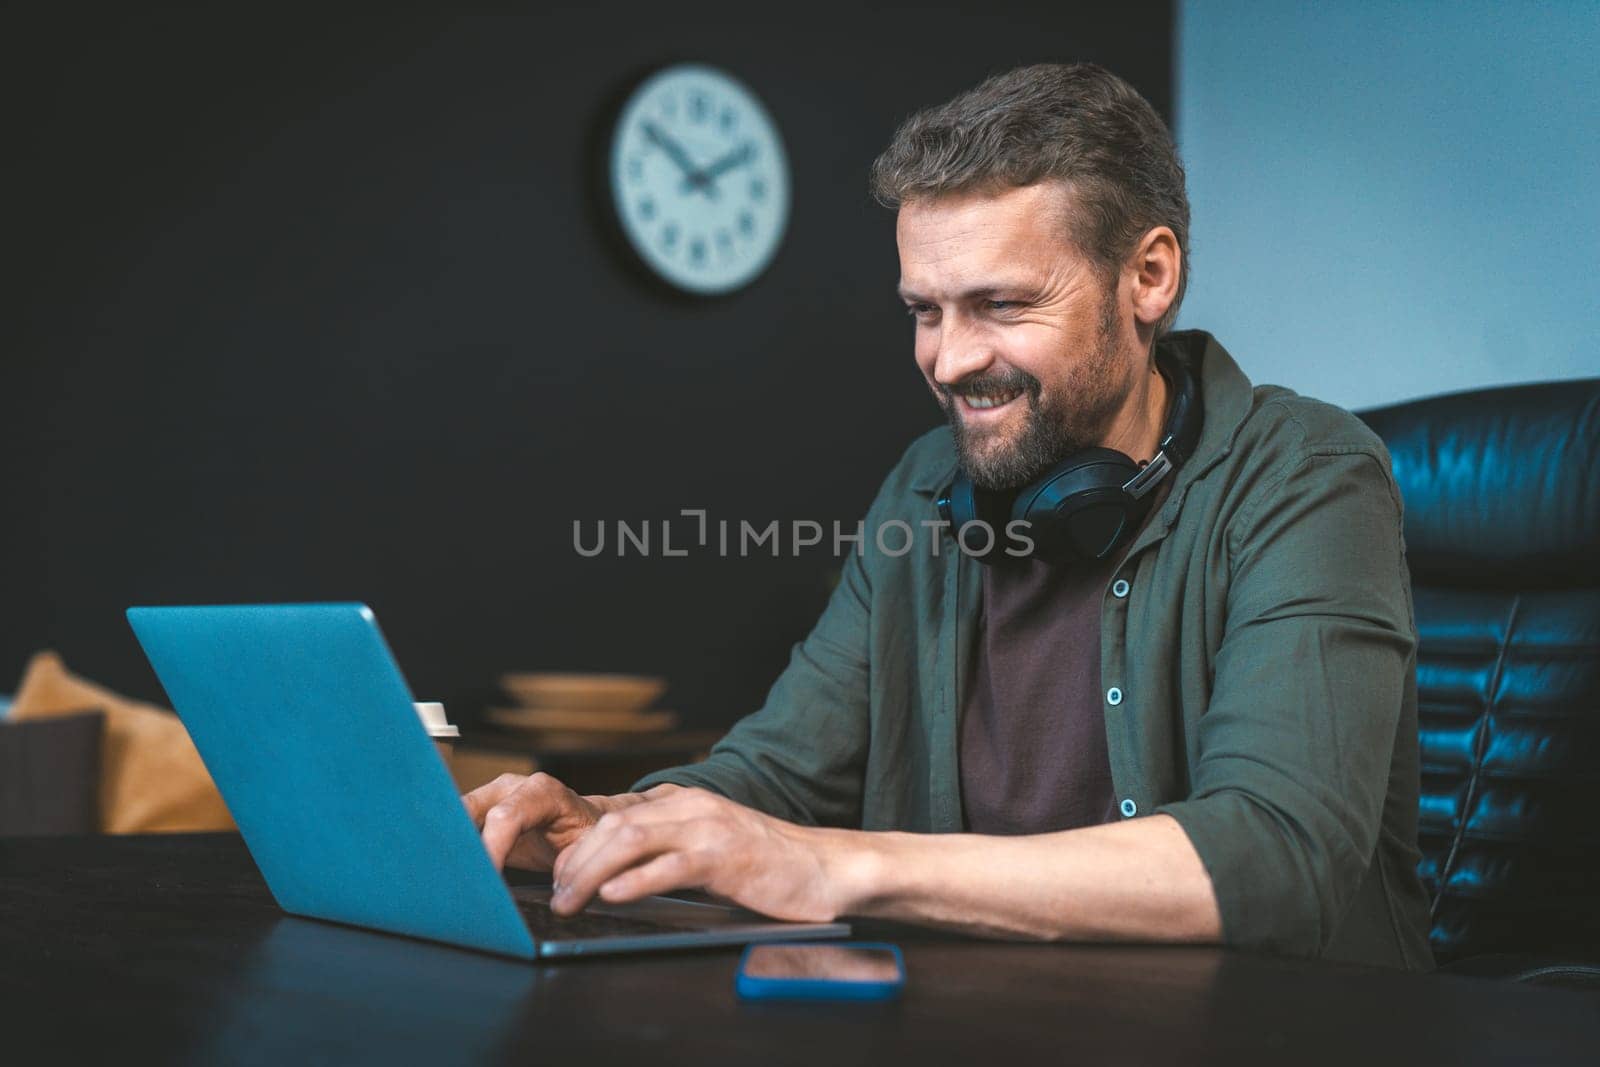 Happy and motivated man is working on laptop at desk in stylish loft office, with intention of making money. He focused and determined, yet also relaxed and comfortable in work environment. by LipikStockMedia